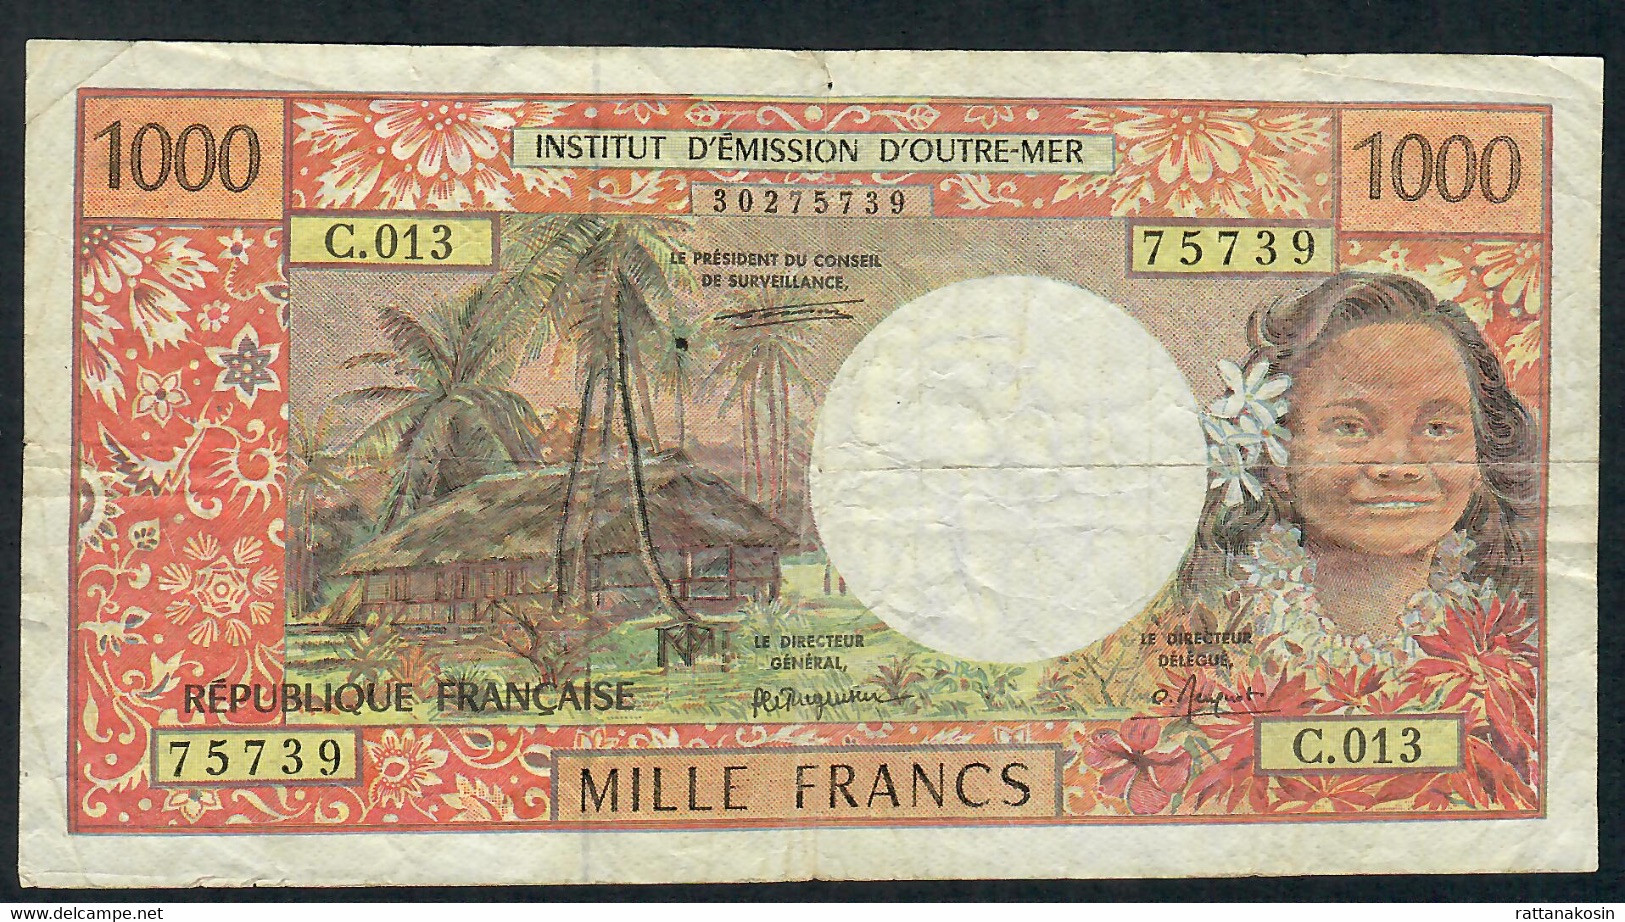 F.P.T. P2a 1000 FRANCS 1995 Signature 3  F-VF - French Pacific Territories (1992-...)